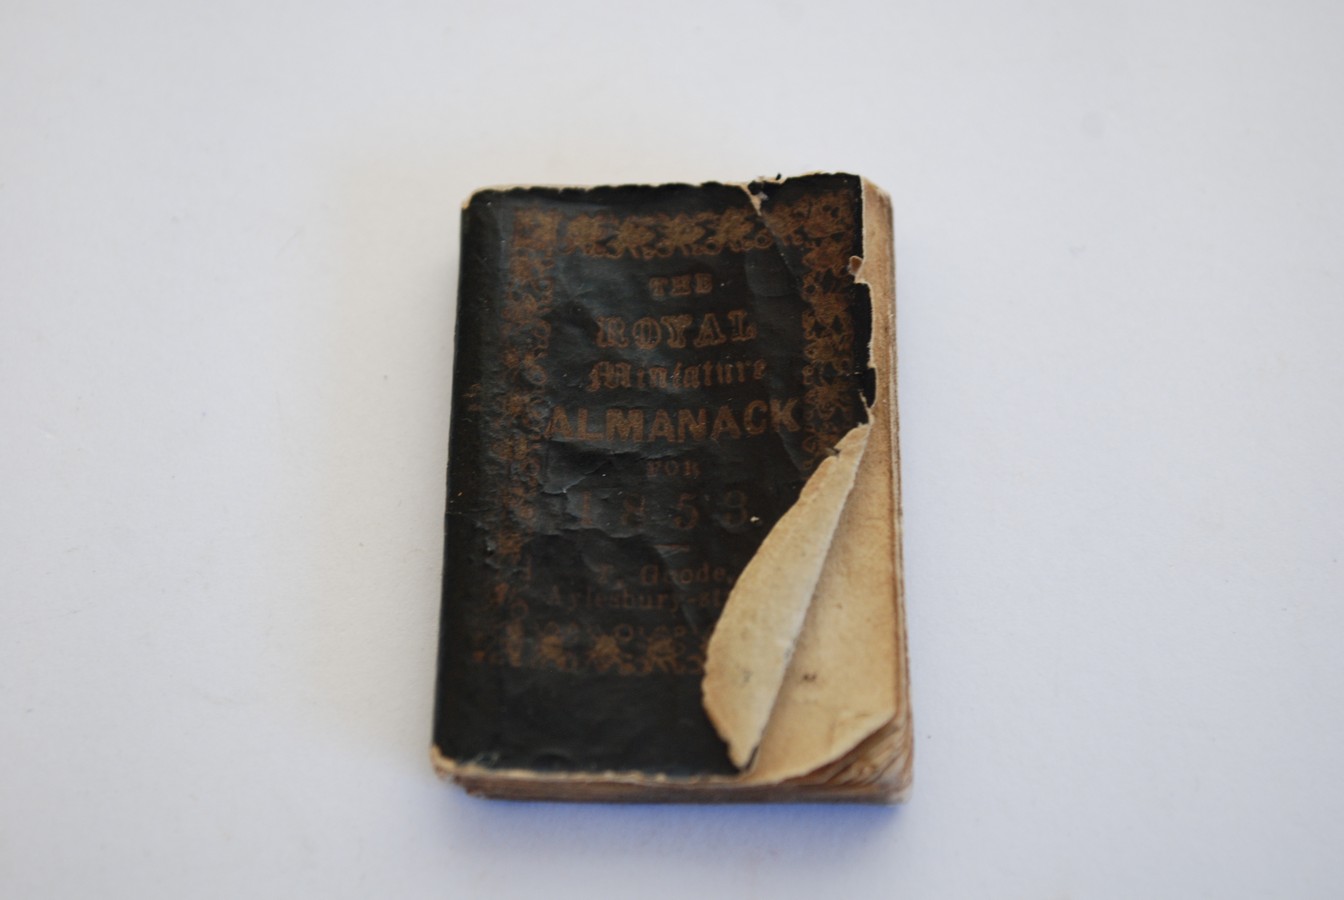 Miniature Books. The Royal Miniature Almanack for 1853, wood-engraved profile portrait of Queen